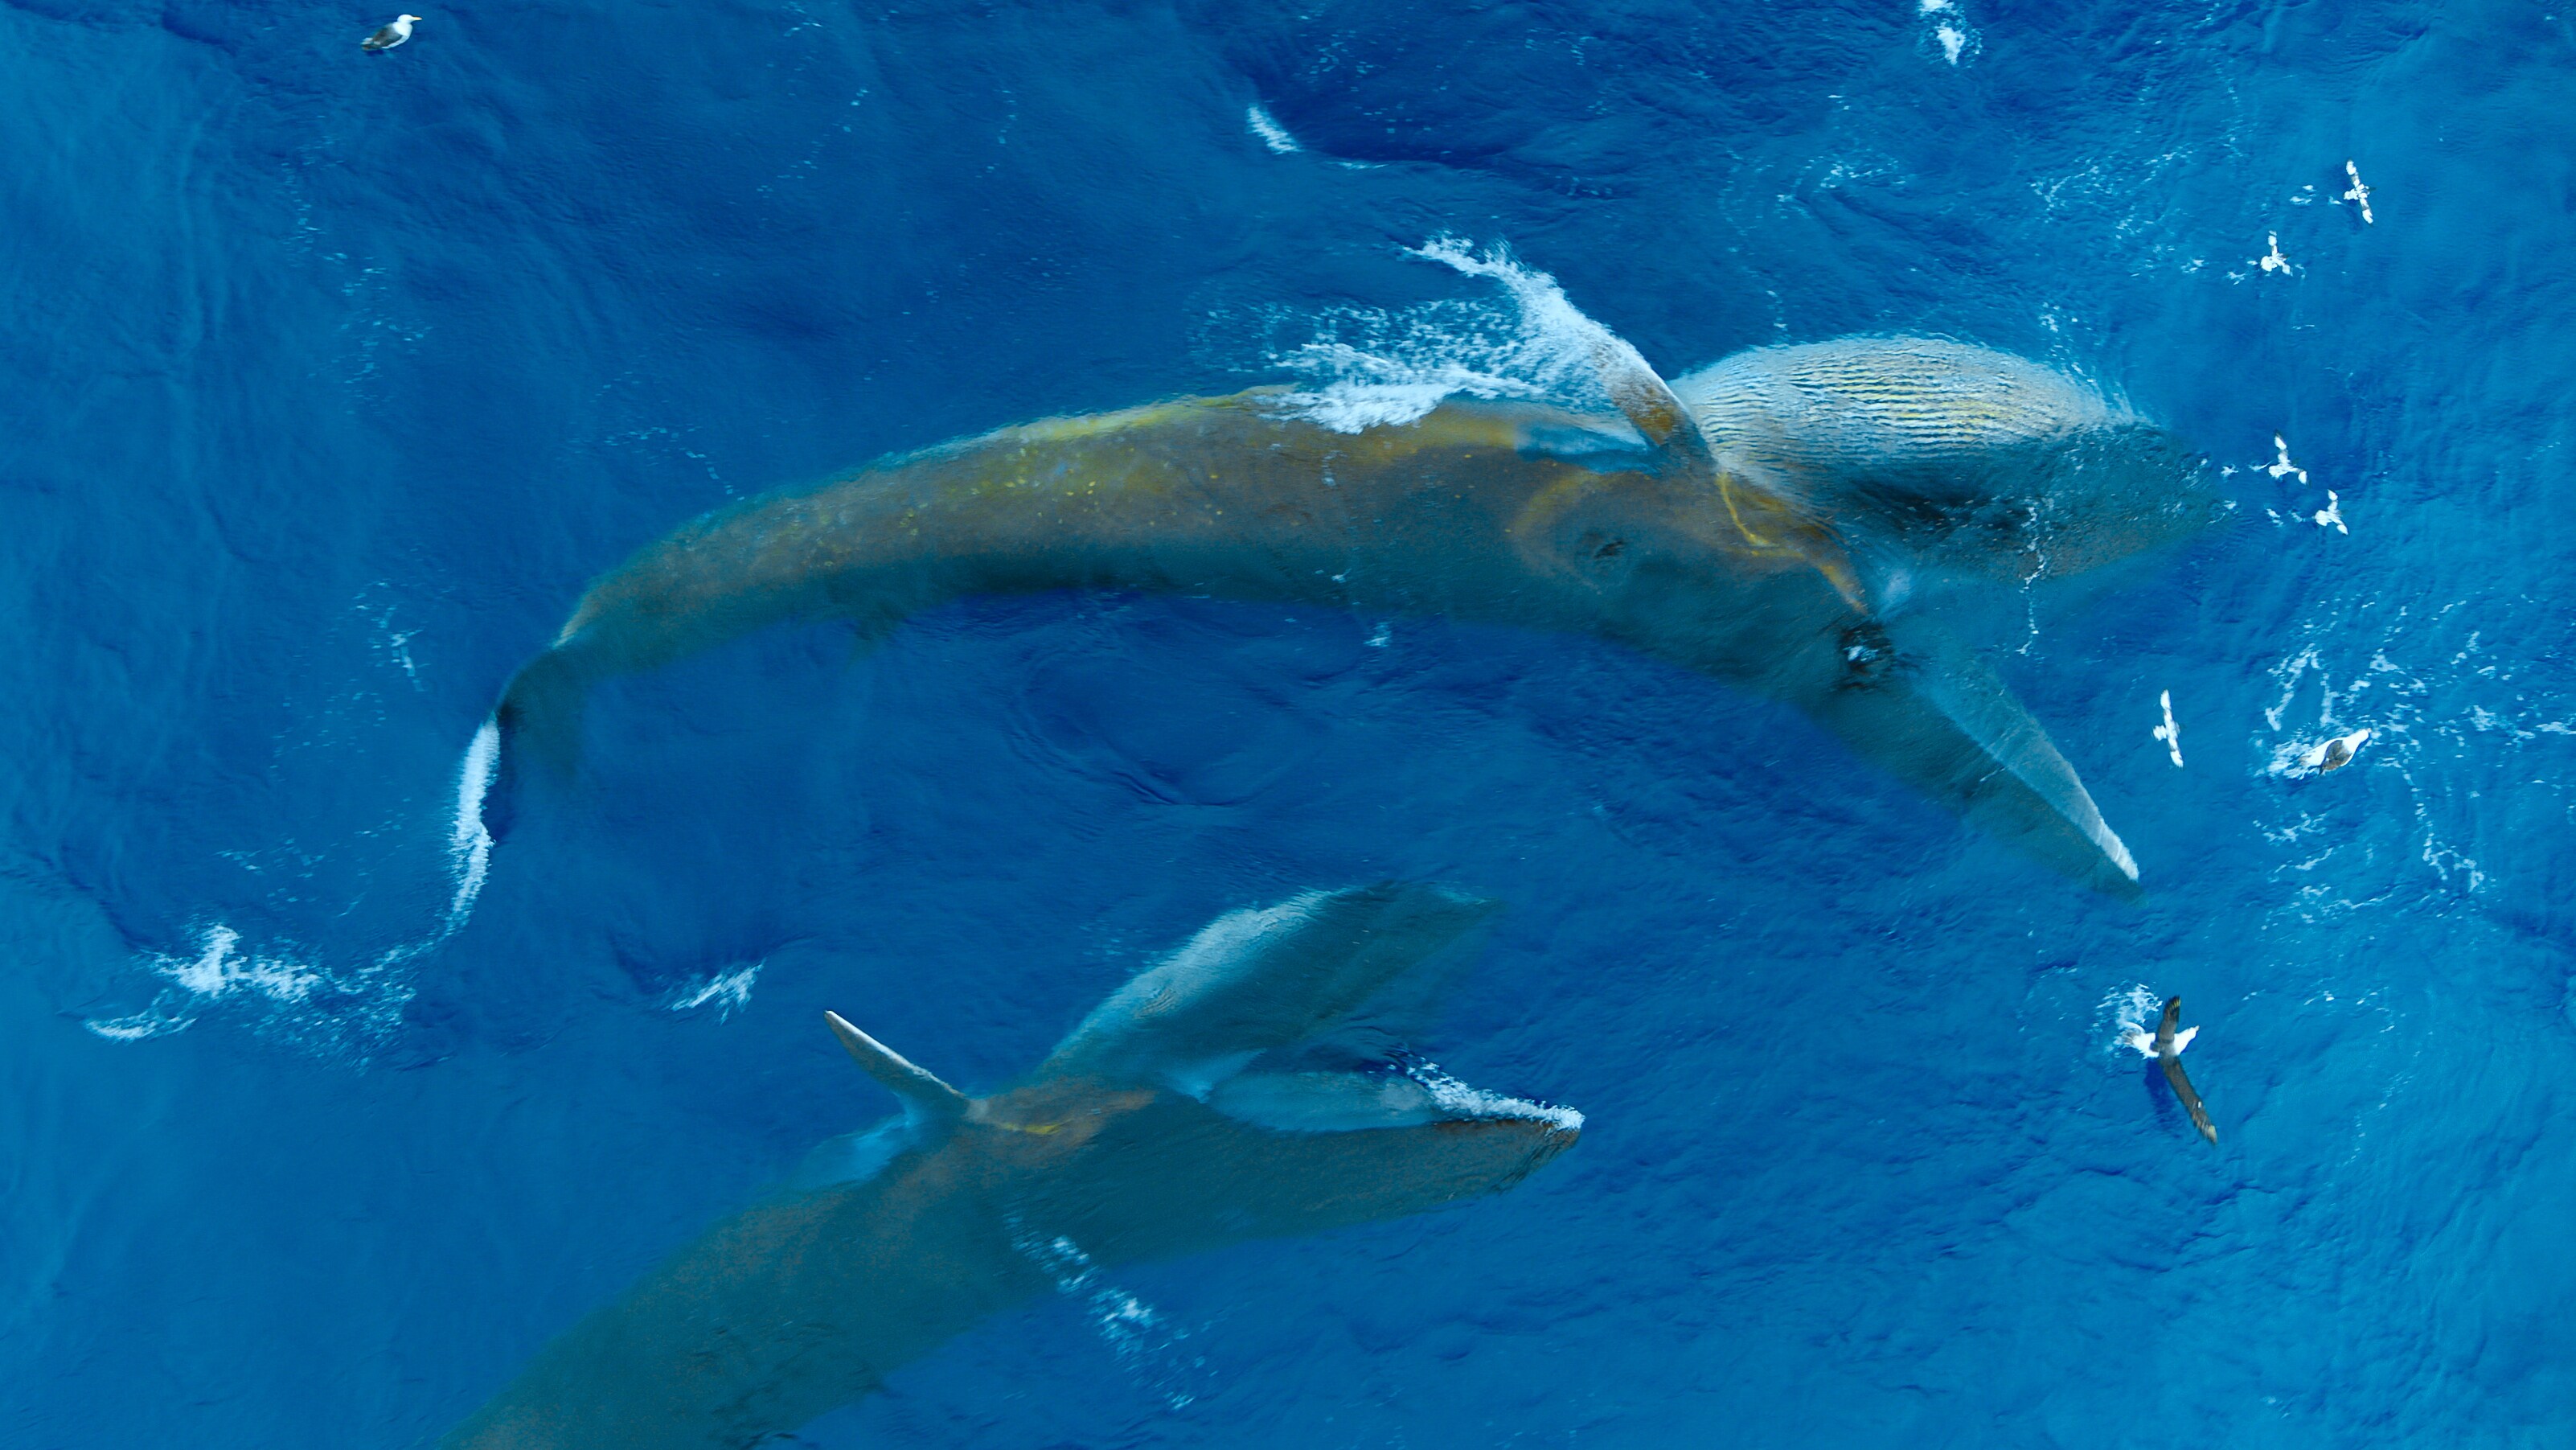 Two Fin whales lung feeding. (Credit: National Geographic/Bertie Gregory for Disney+)